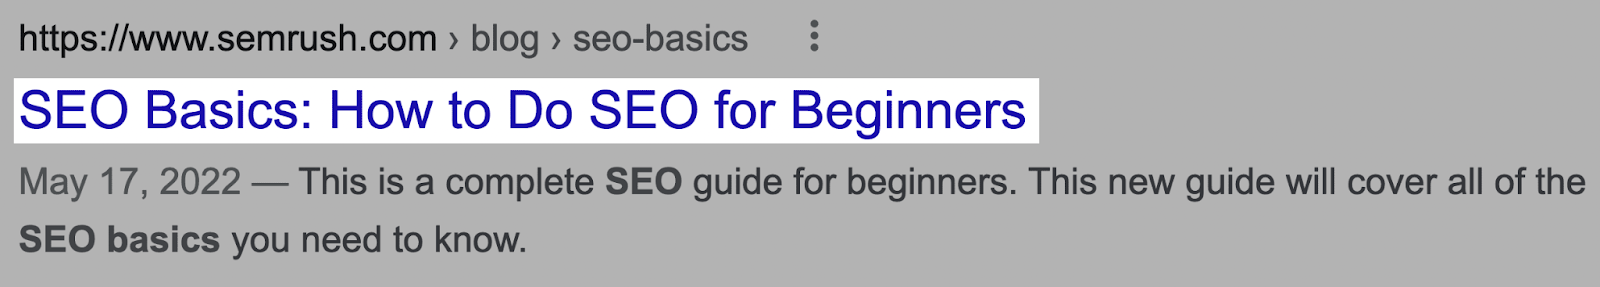 "SEO Basics: How to Do SEO for Beginners" title tag in Google SERP